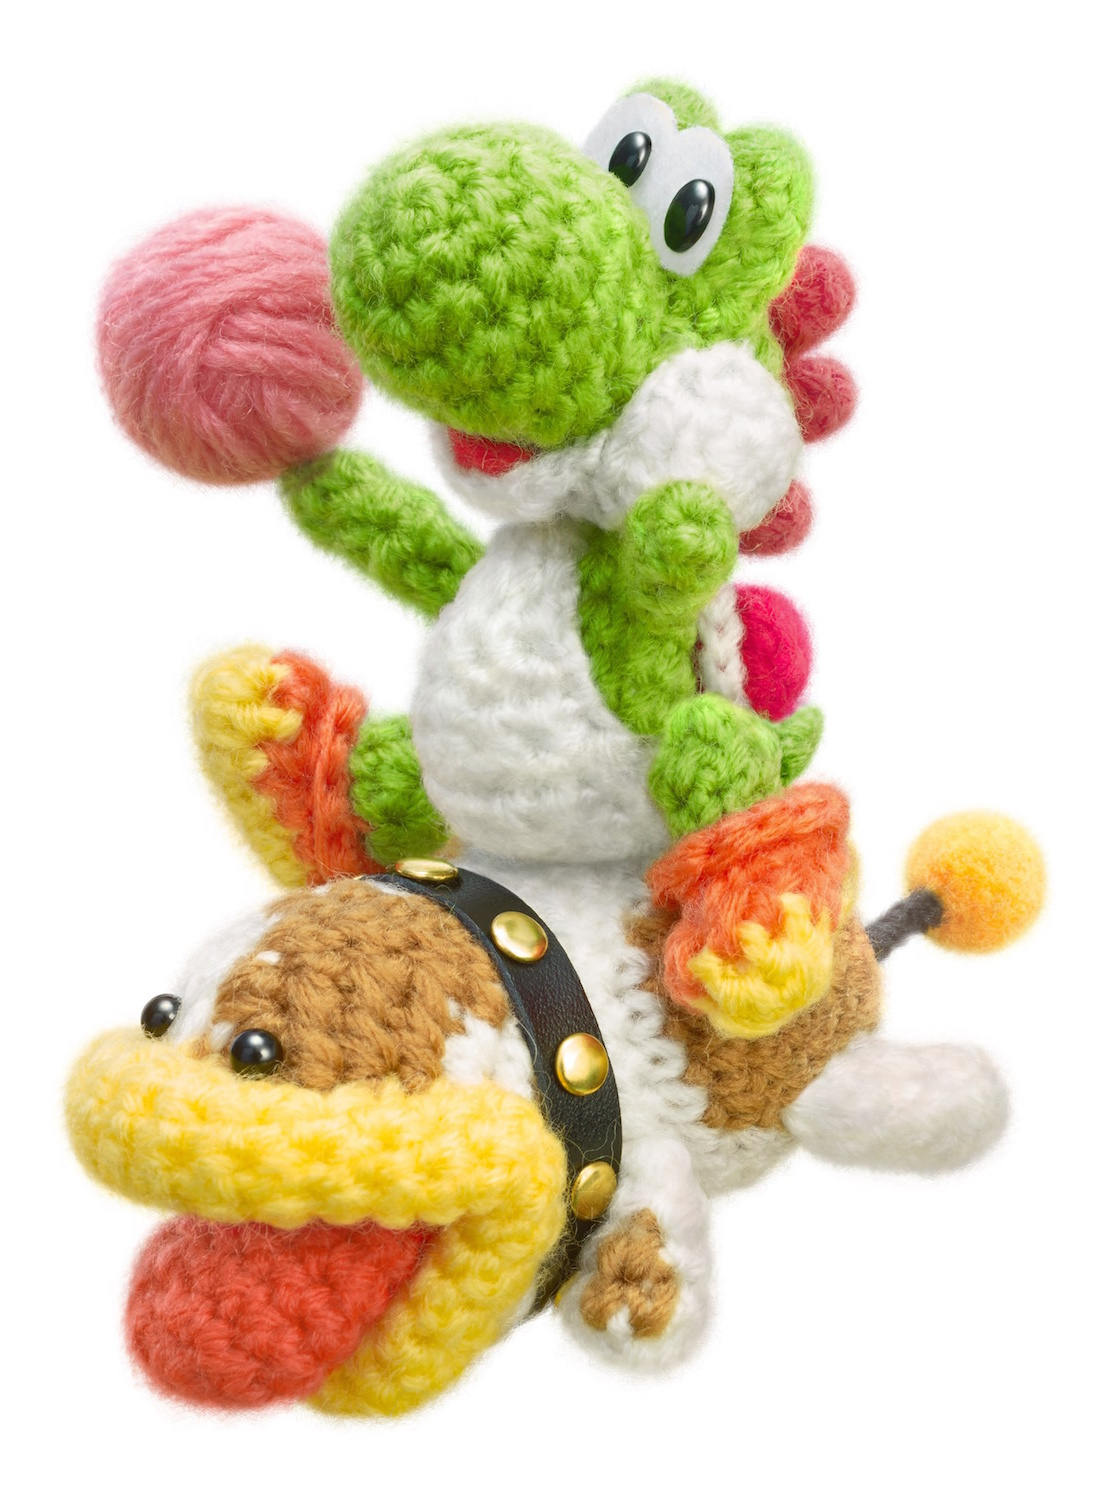 yoshis woolly world wii u game informer review